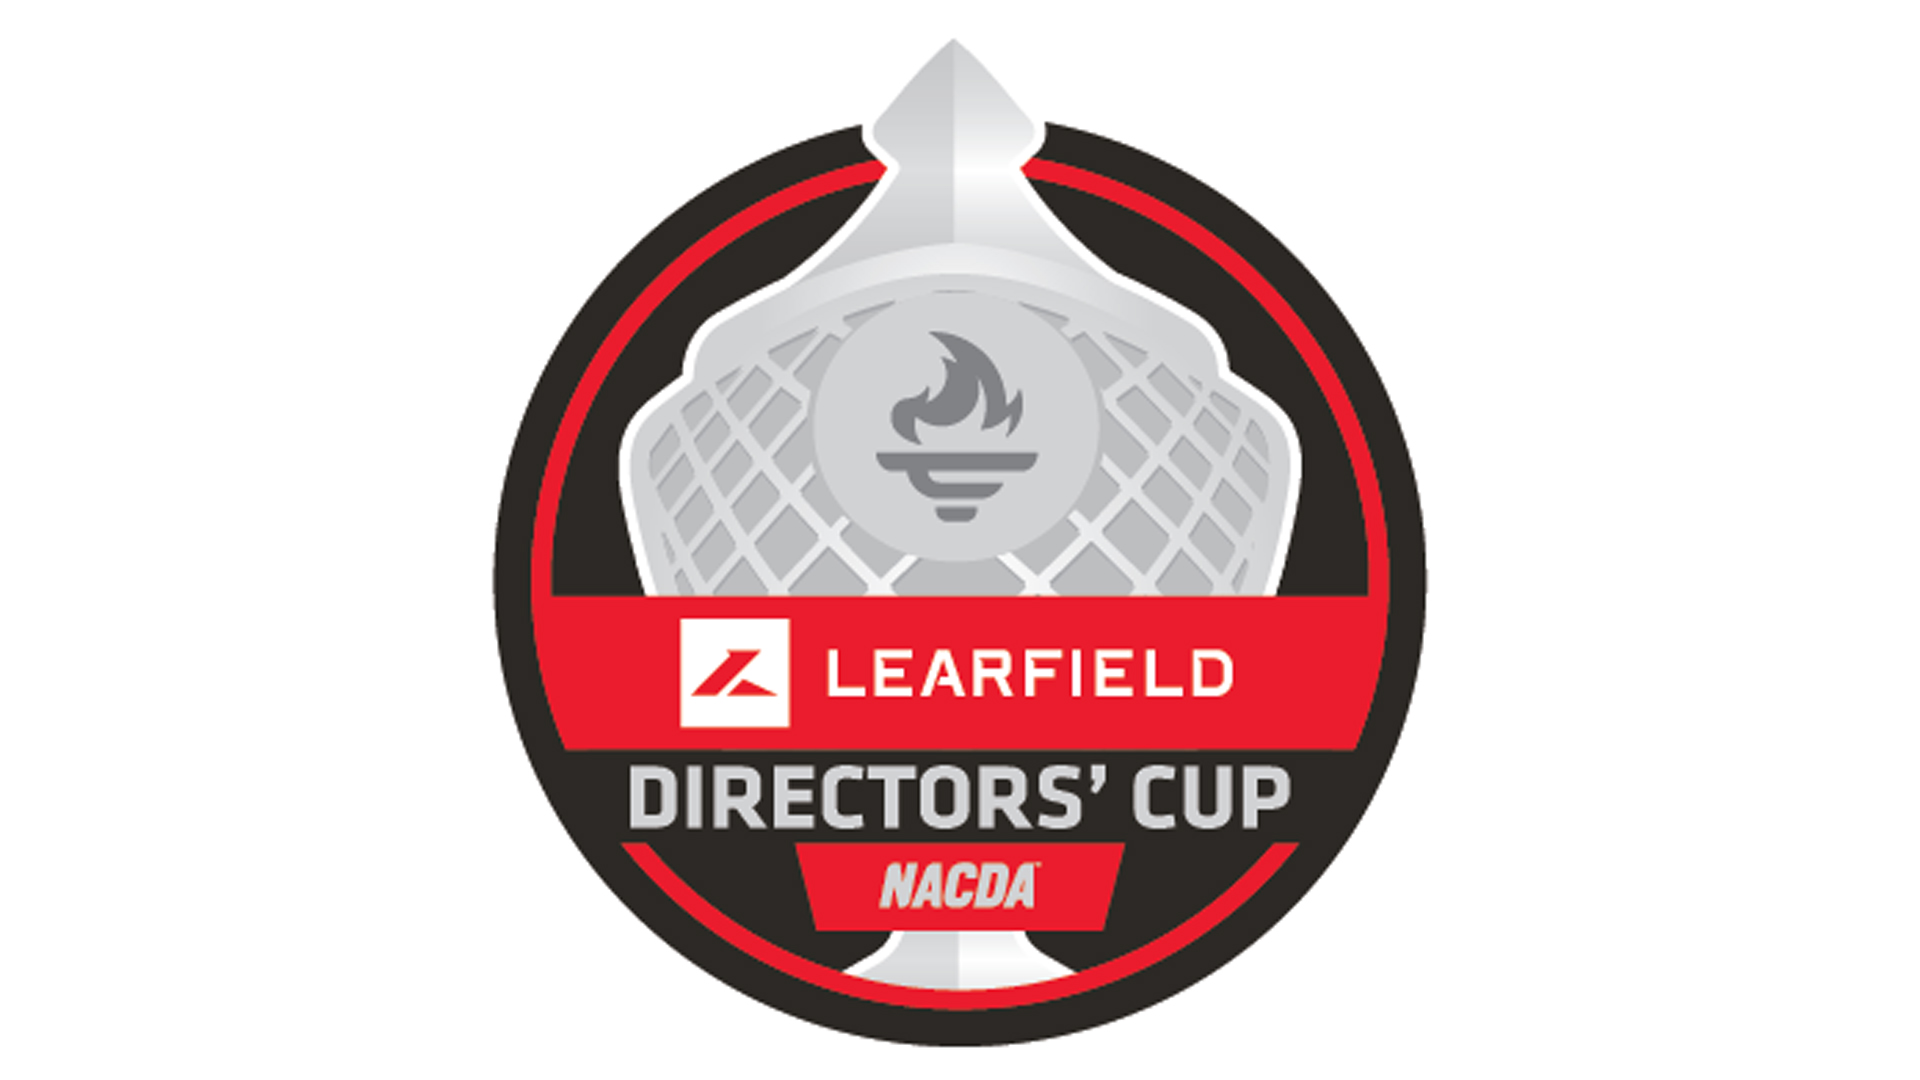 Carnegie Mellon Athletics Earns Best-Ever Finish in Final Division III Learfield Directors’ Cup Standings for the Second Consecutive Year